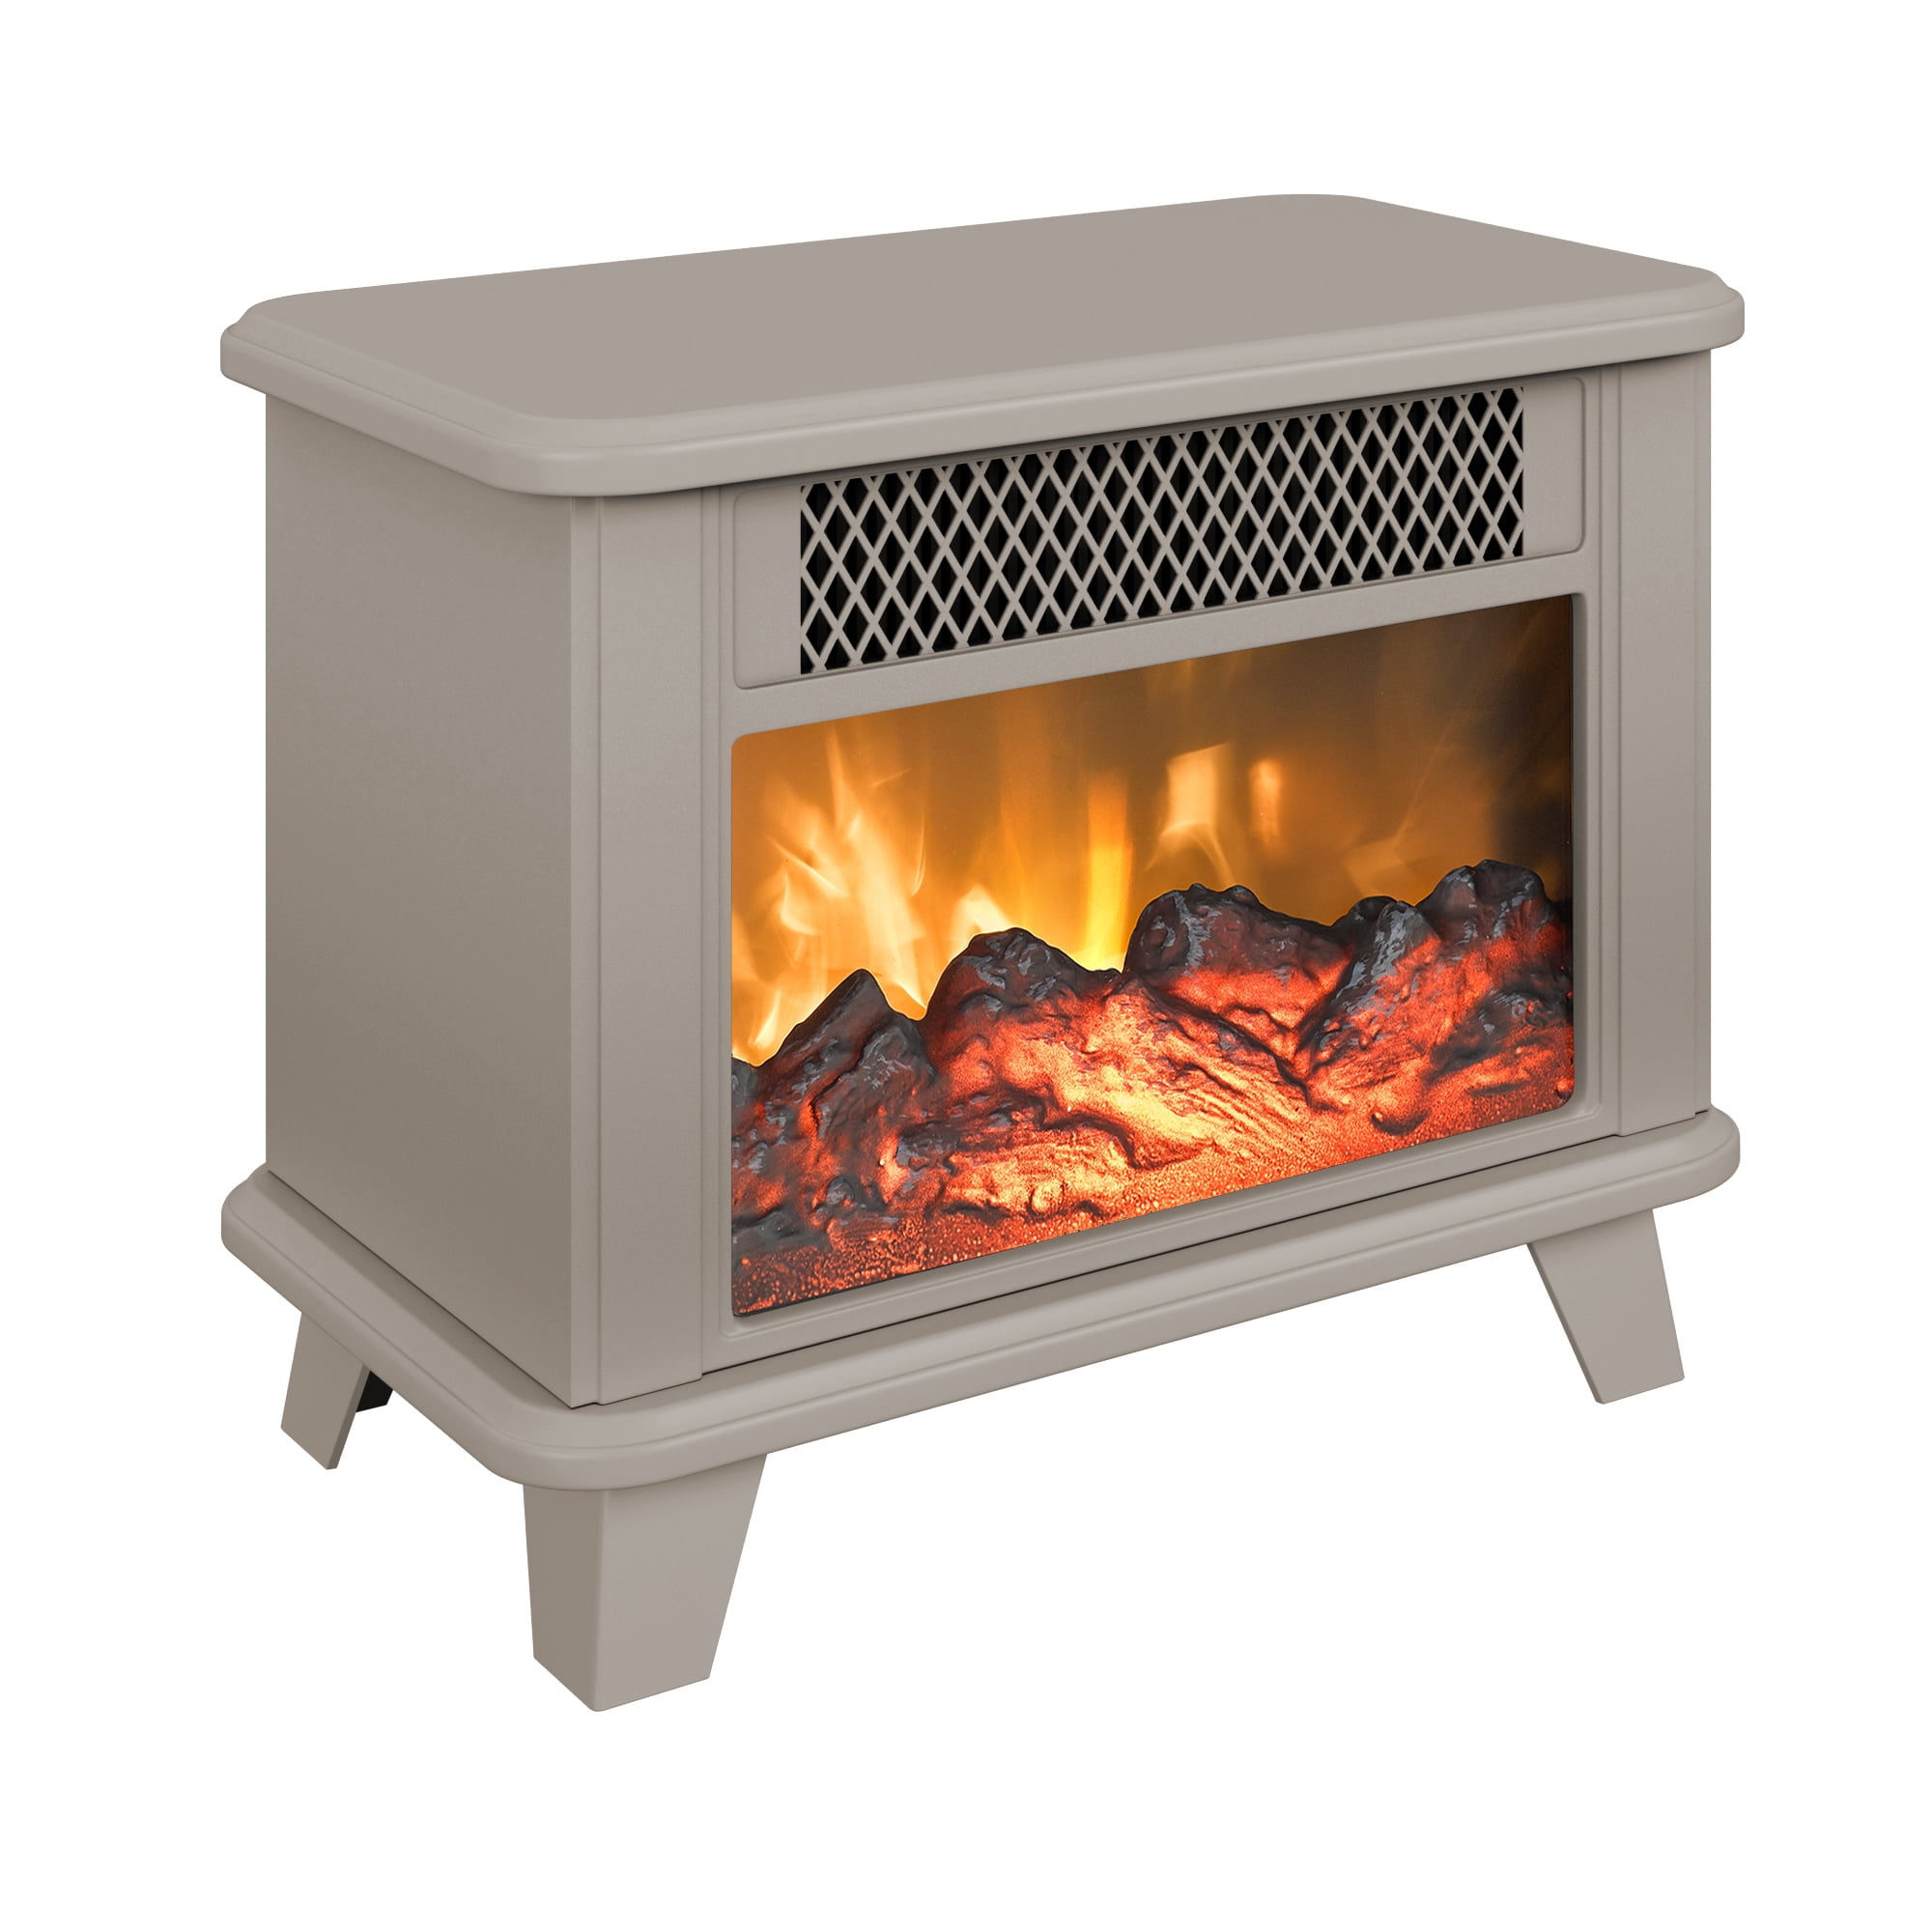 ChimneyFree Electric Fireplace Personal Floor Standing Space Heater, Cream